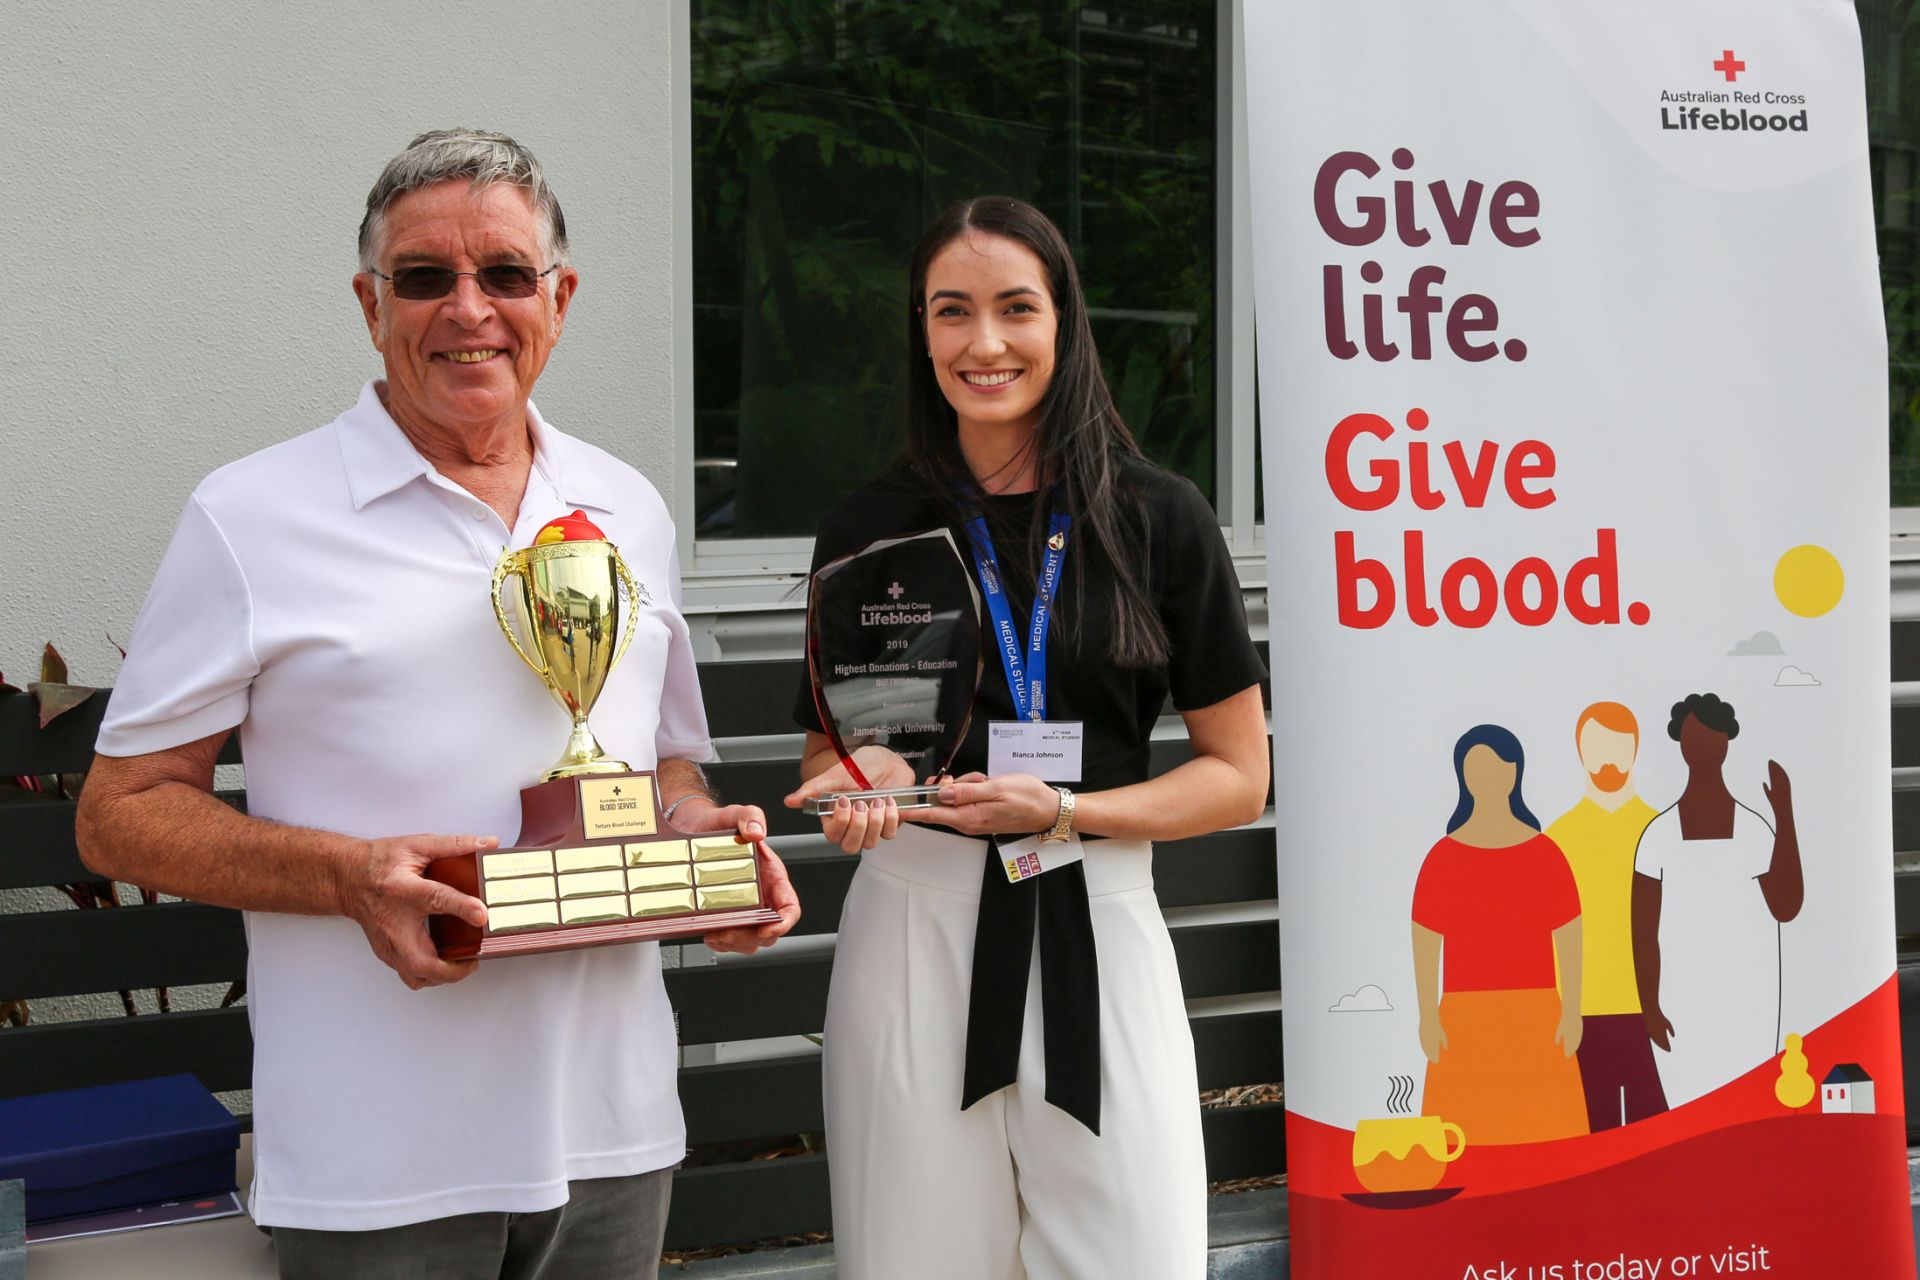 Bill Tweddell and Bianca Johnson hold trophies and stand next to a blood donation promotional banner